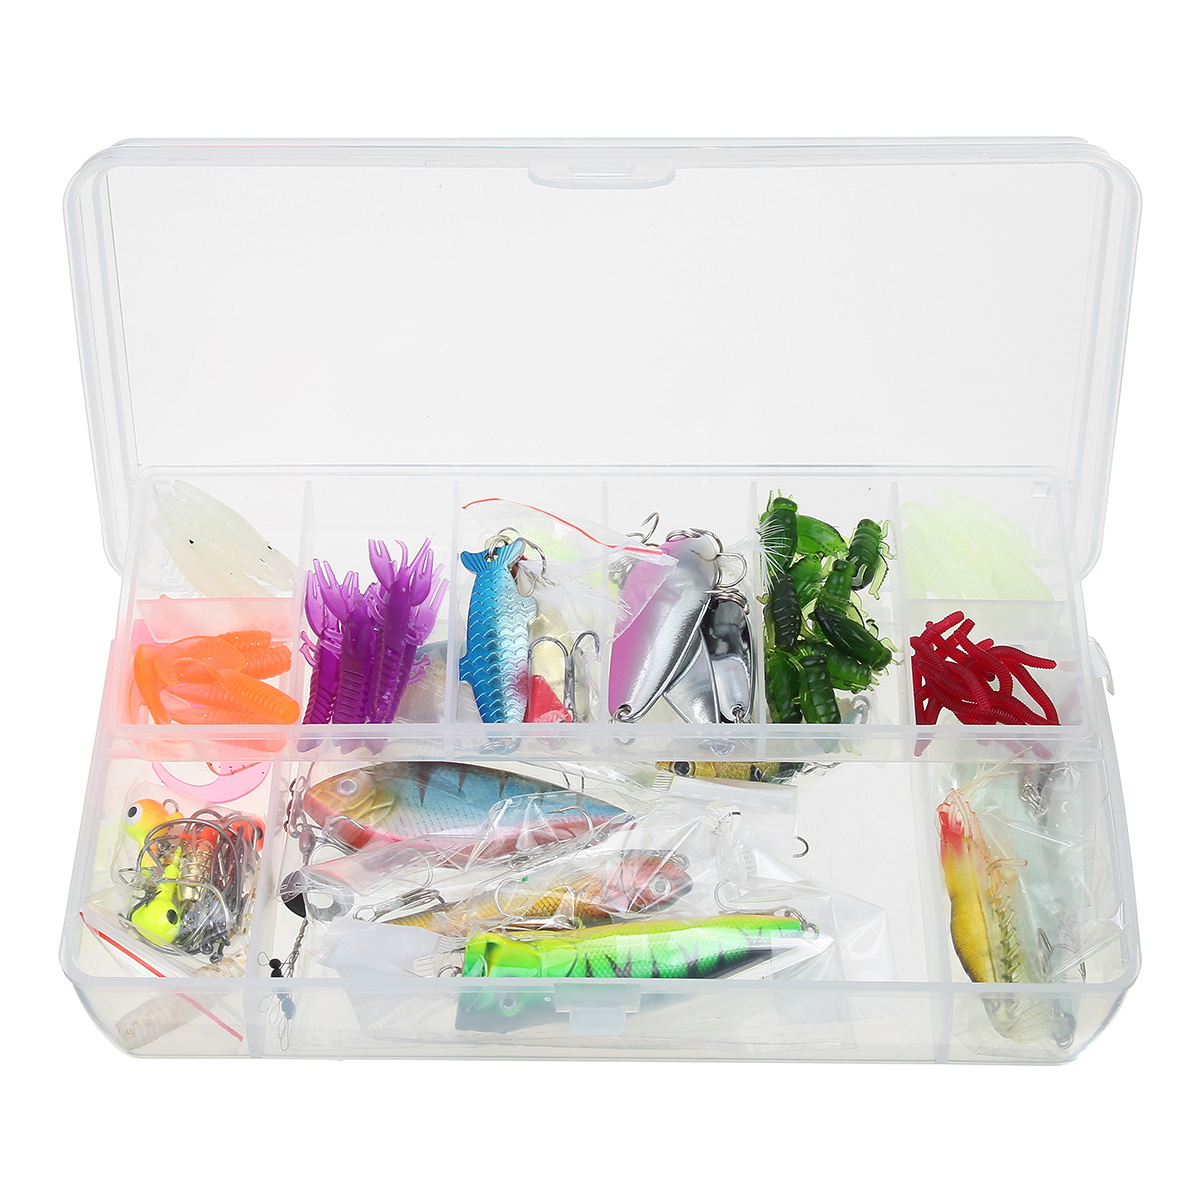 ZANLURE-100-Pcs-Fishing-Lures-Sea-Fishing-Baits-Perch-Salmon-Pike-Trout-Spinners-Tackle-Hook-Fishing-1813859-8